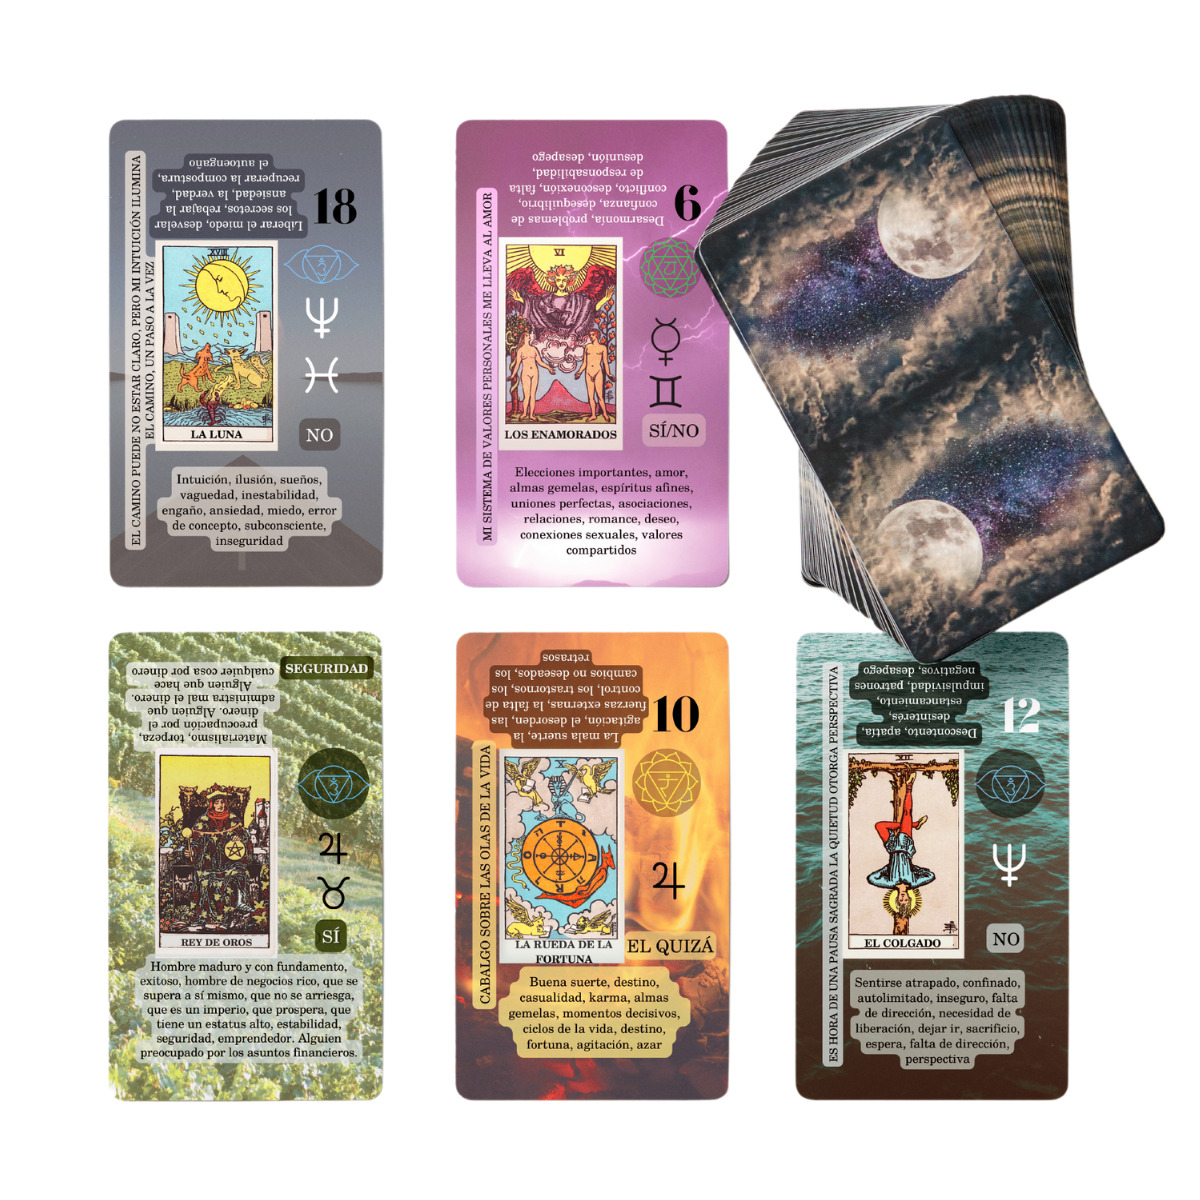 Spanish Learning Tarot Card for Beginners with Meanings on Them - Training Begin